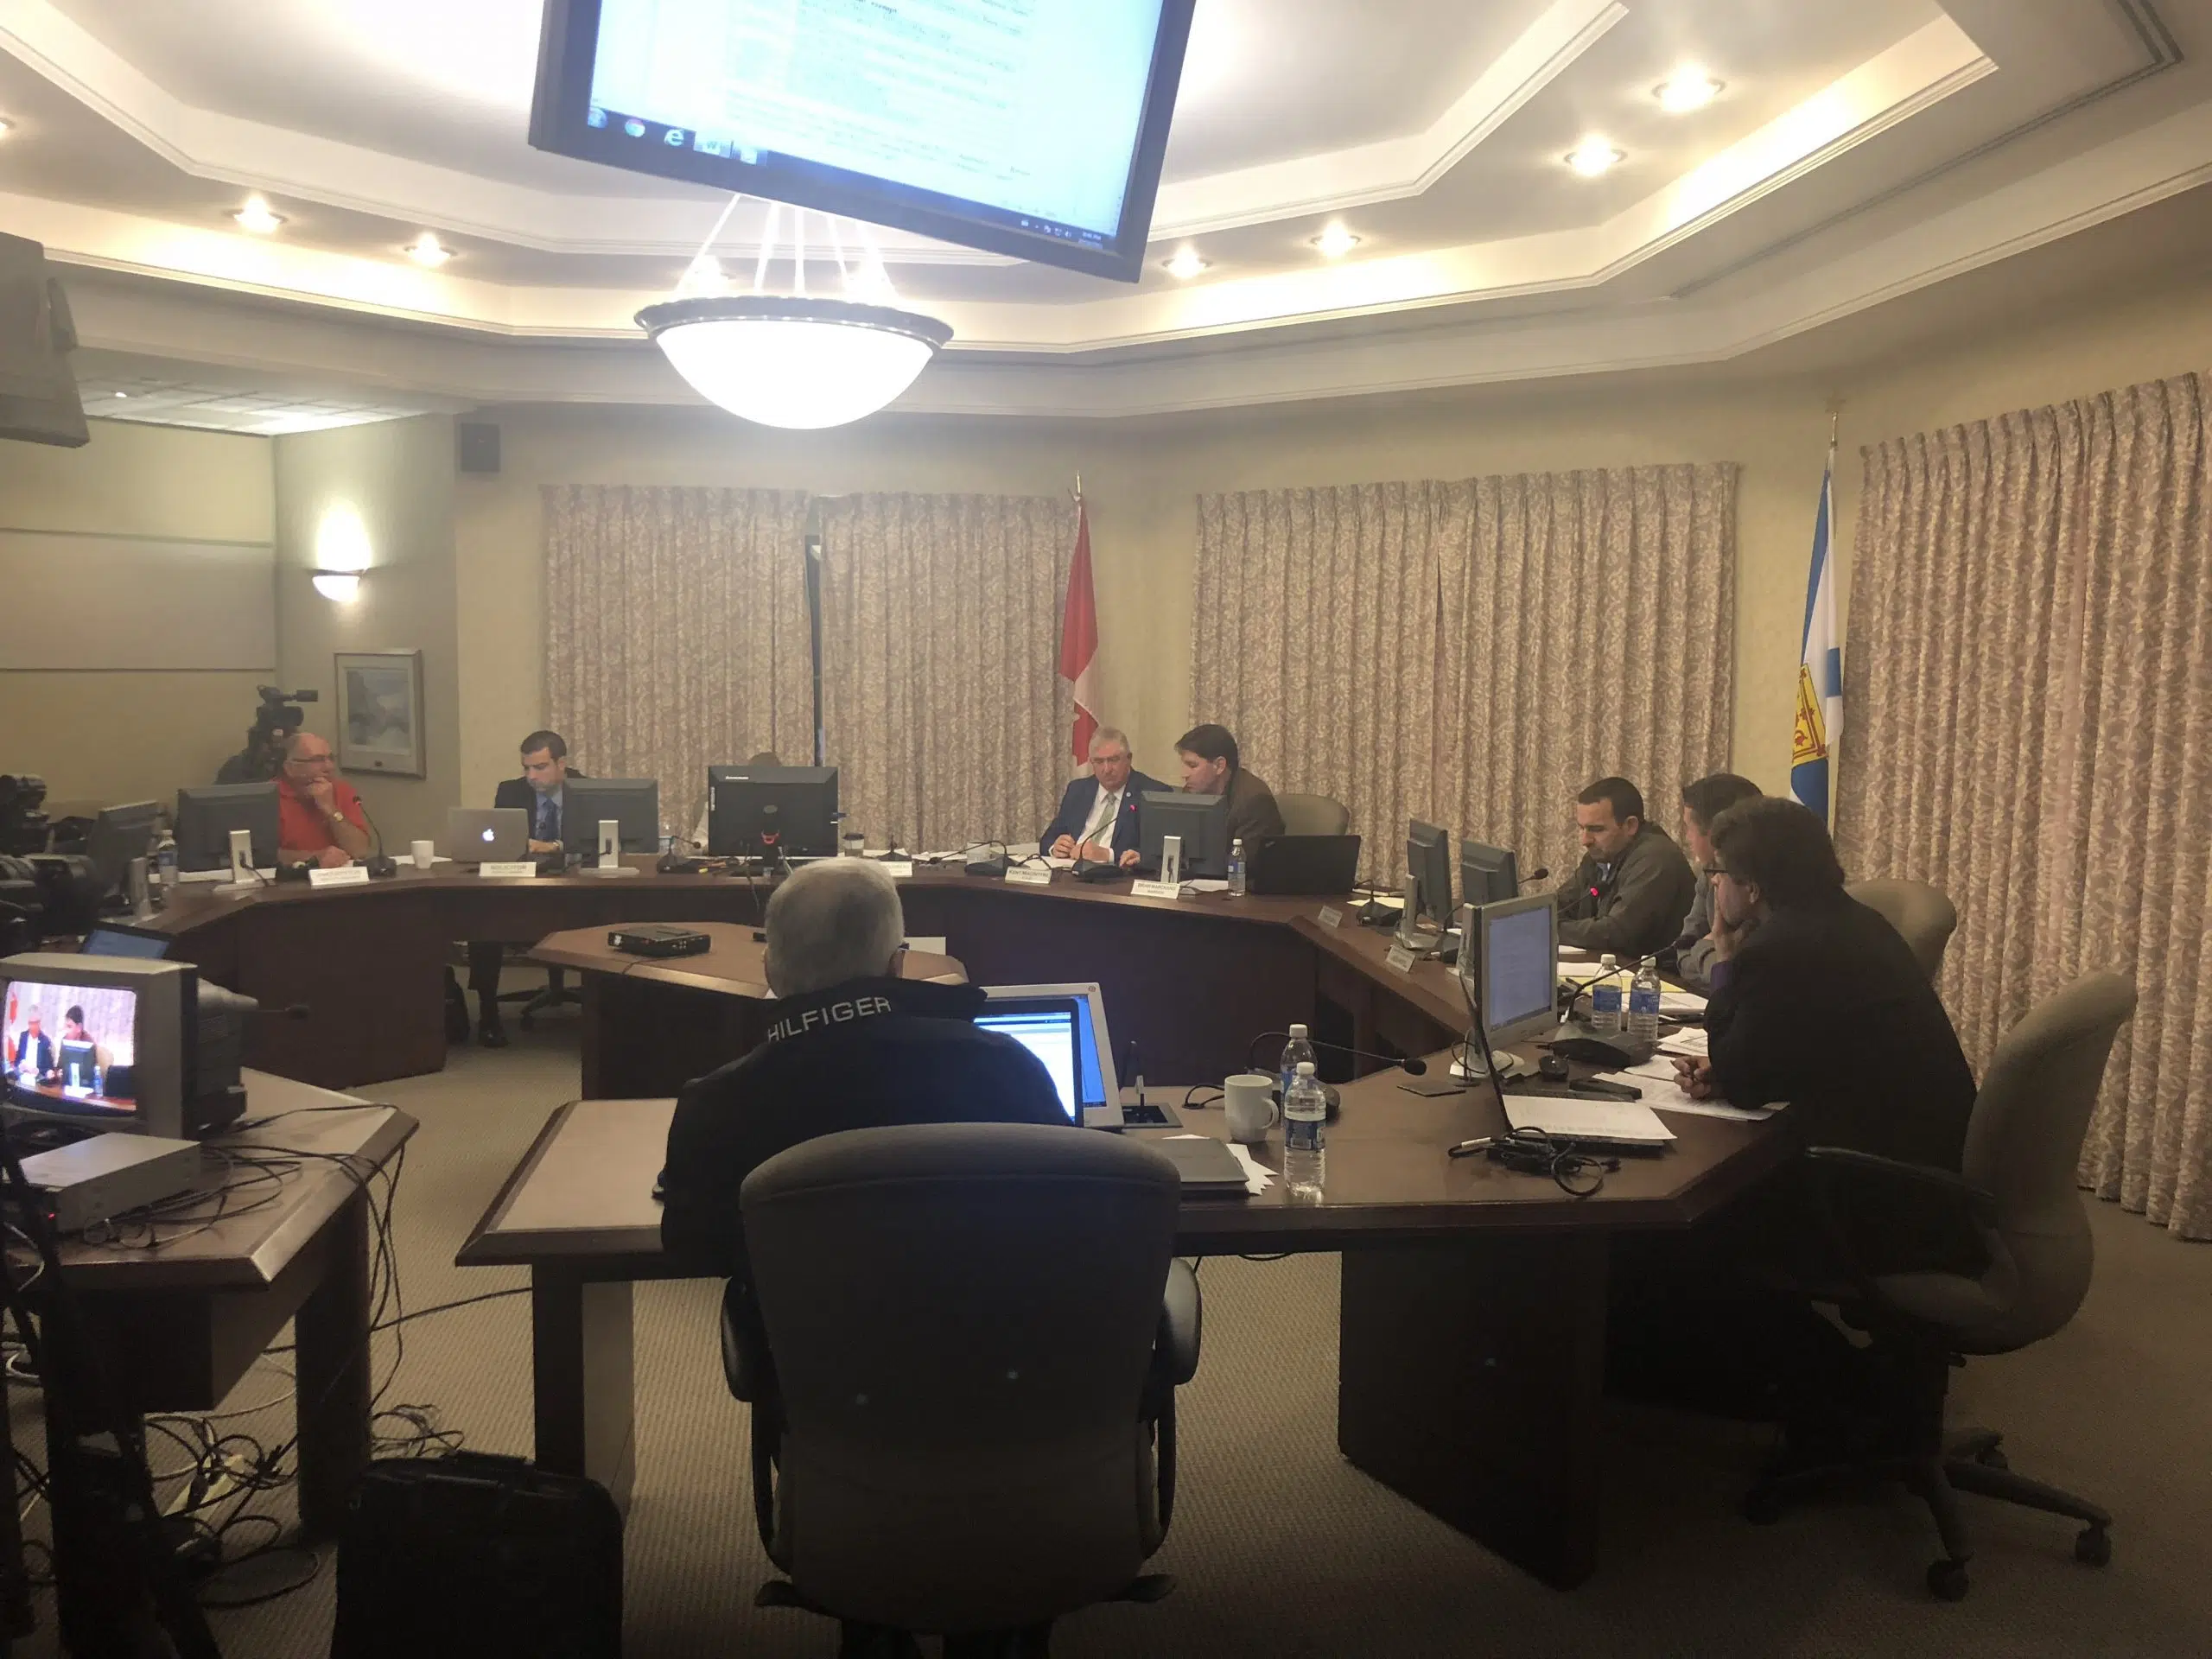 County reps positive about streetscape project in Arichat